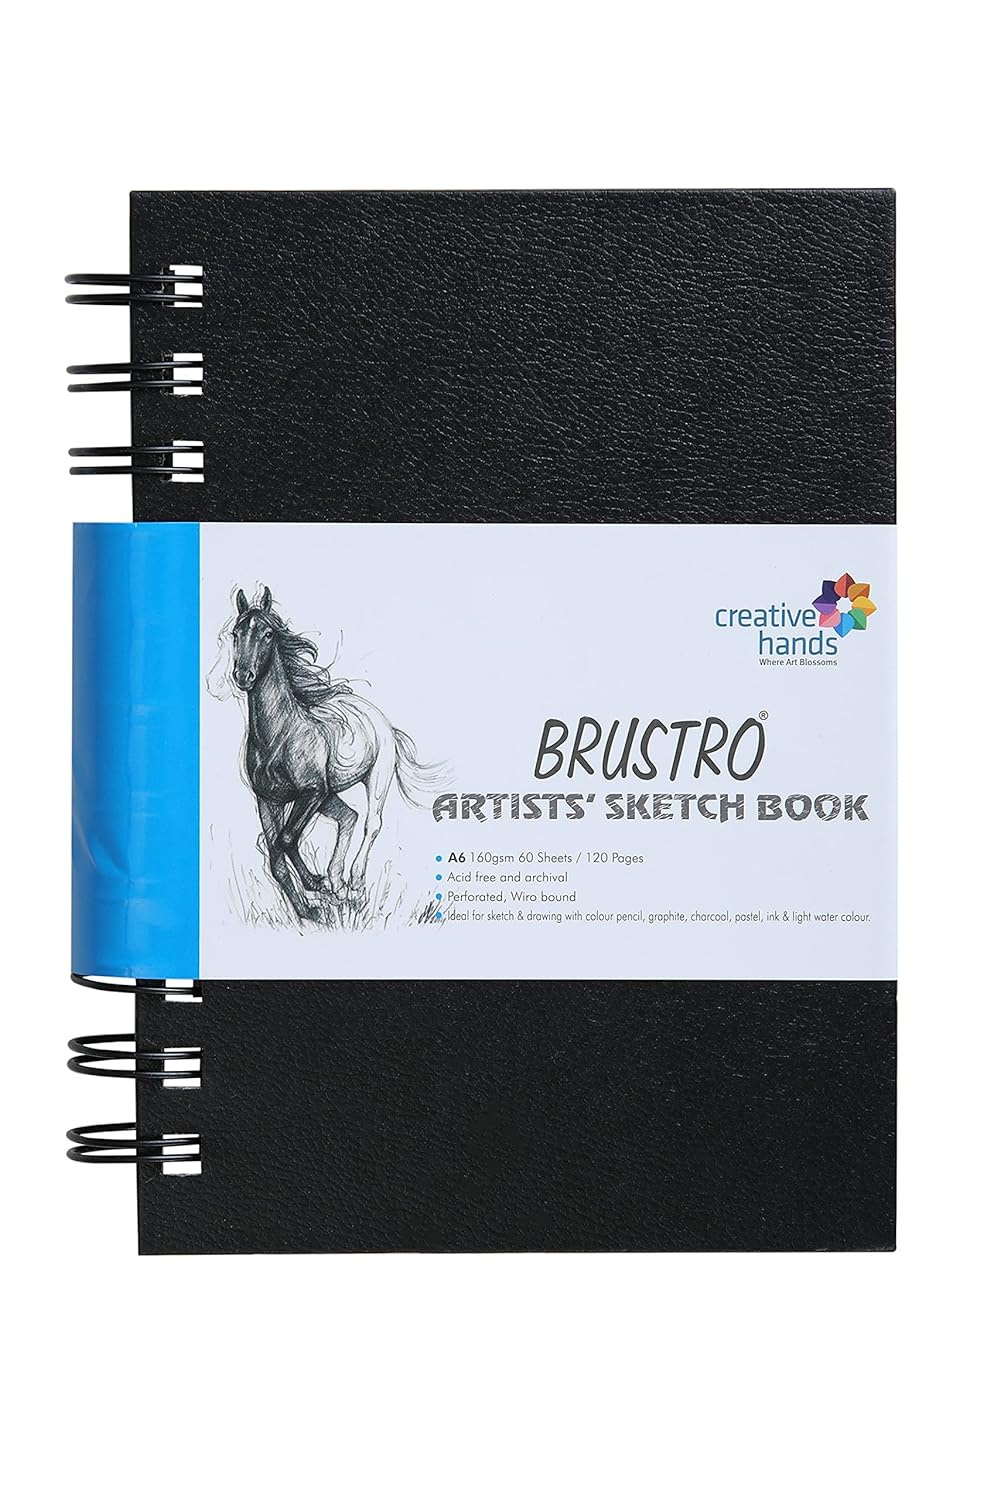 Brustro Artists Small Wiro Bound Sketch Book, A6 Size, 120 Pages, 160 GSM